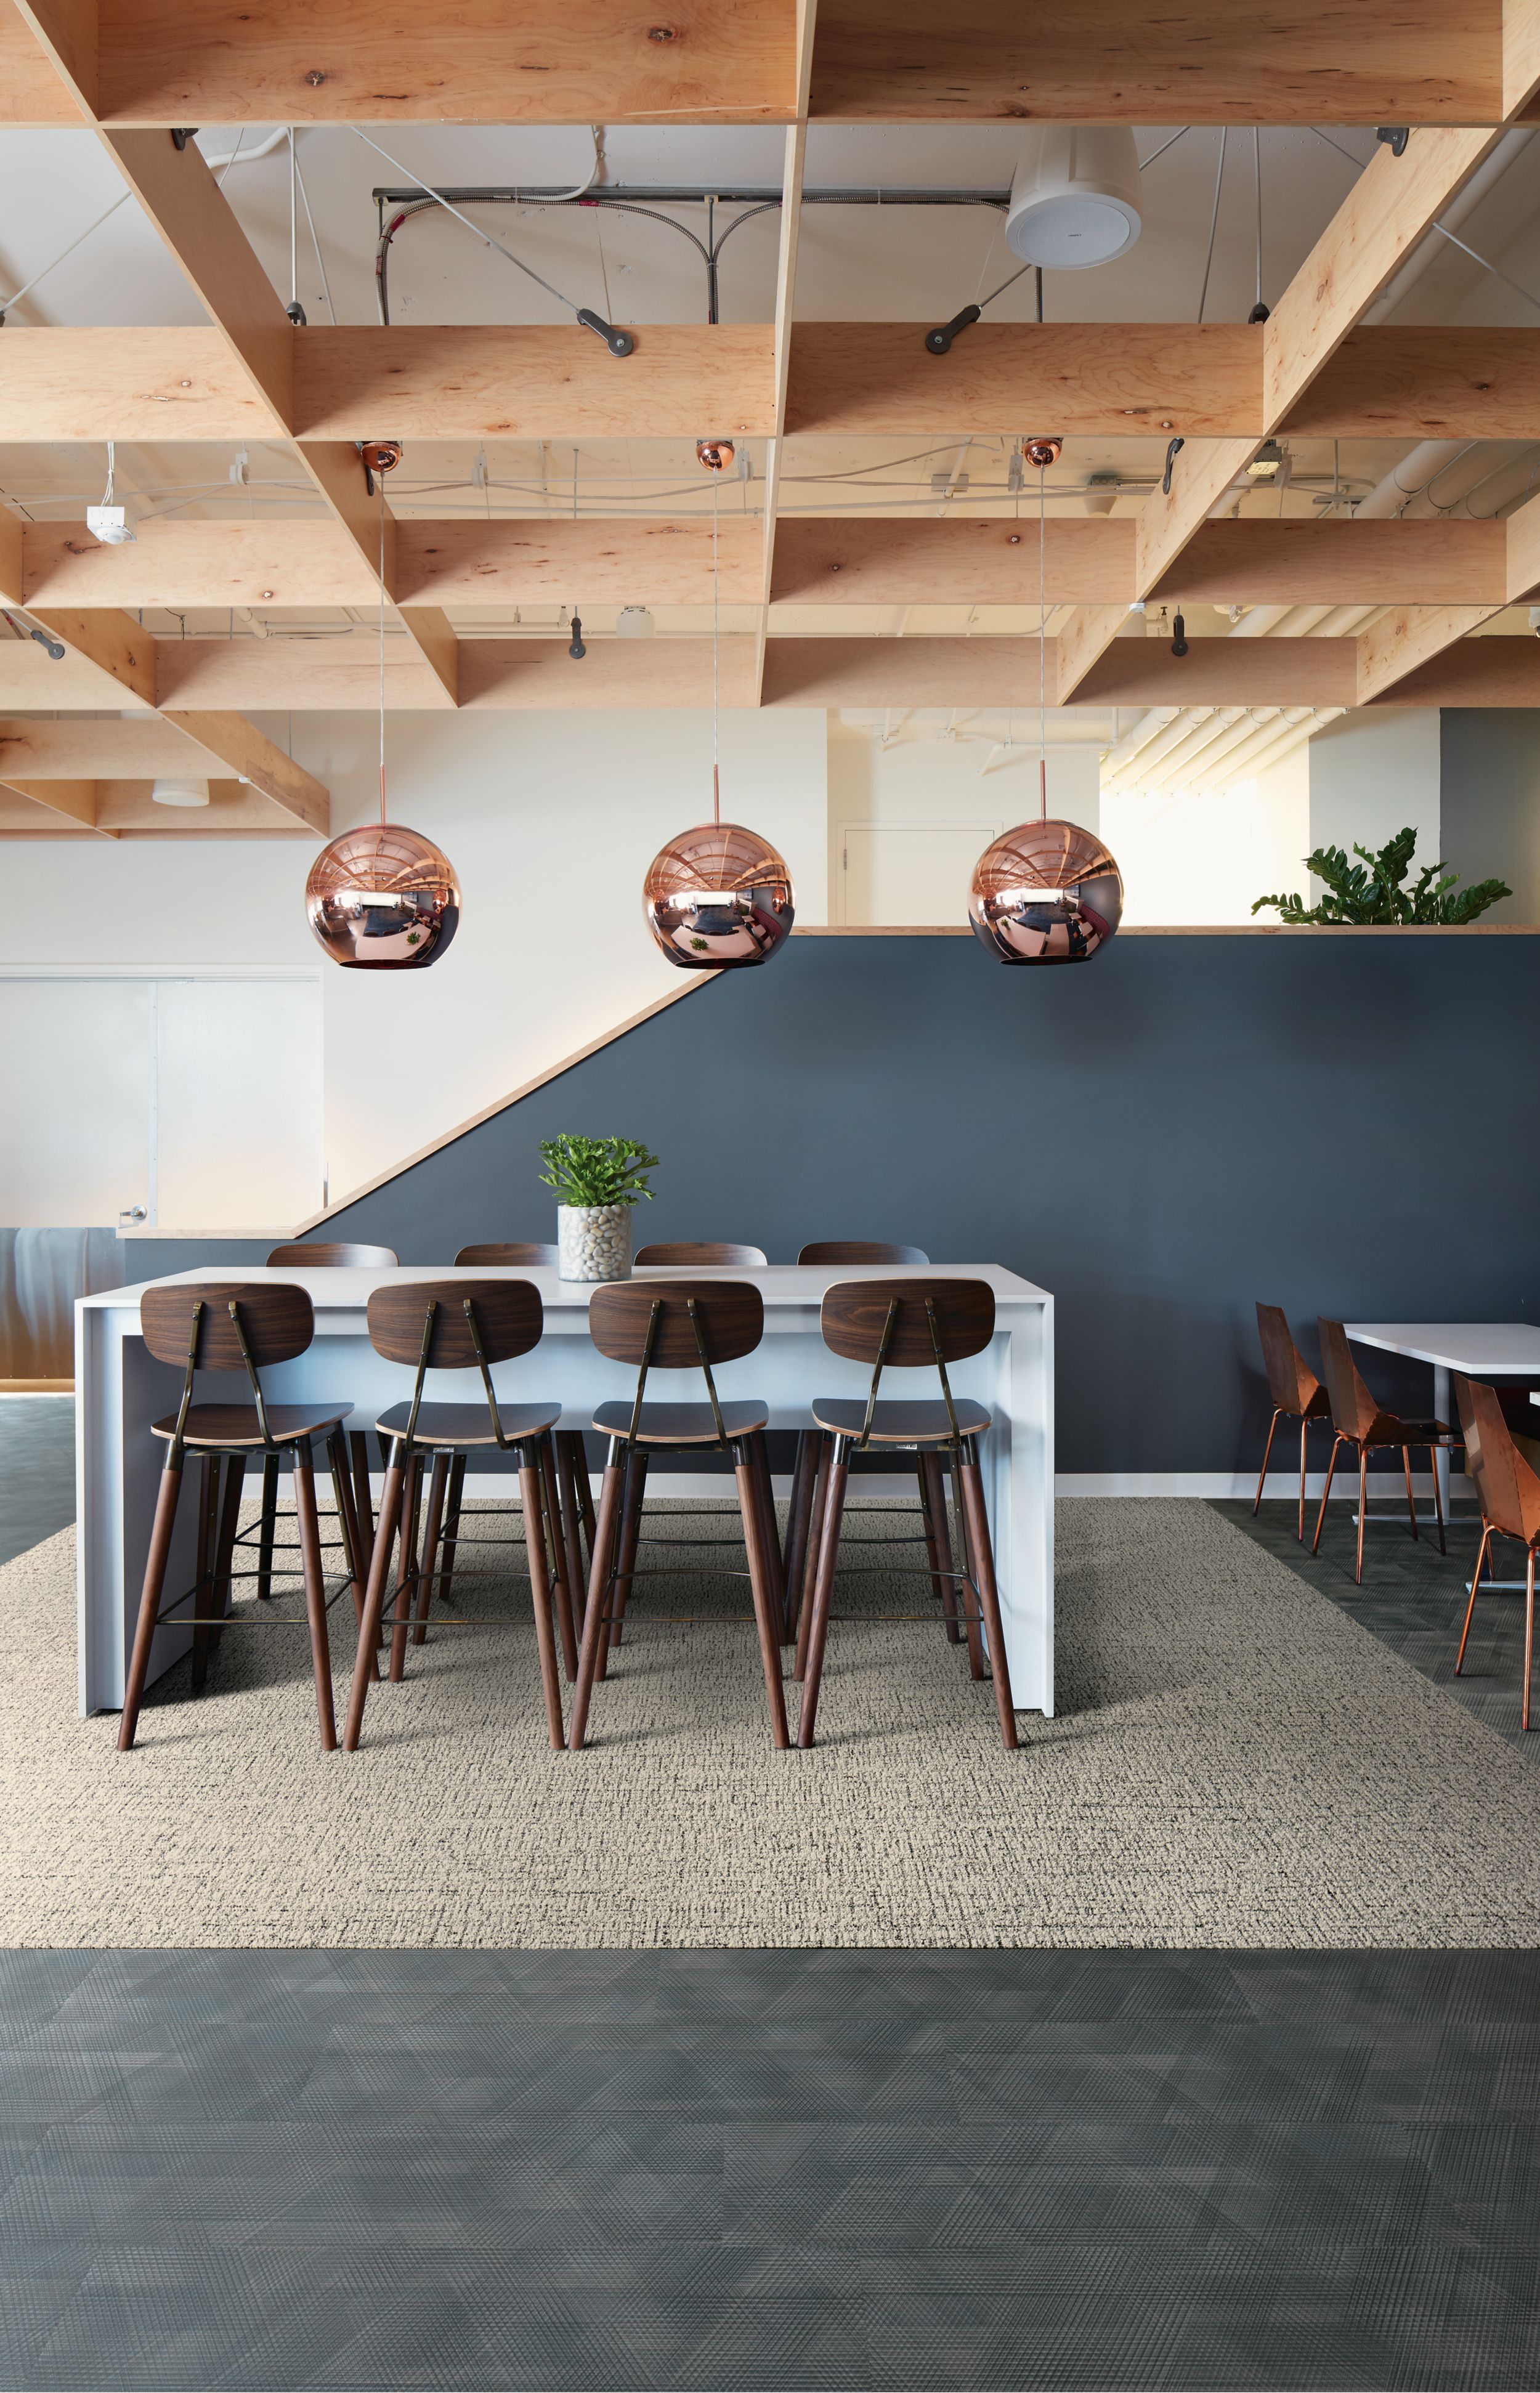 Interface Haptic plank carpet tile and Drawn Lines LVT in public office space with wood grid ceiling Bildnummer 6